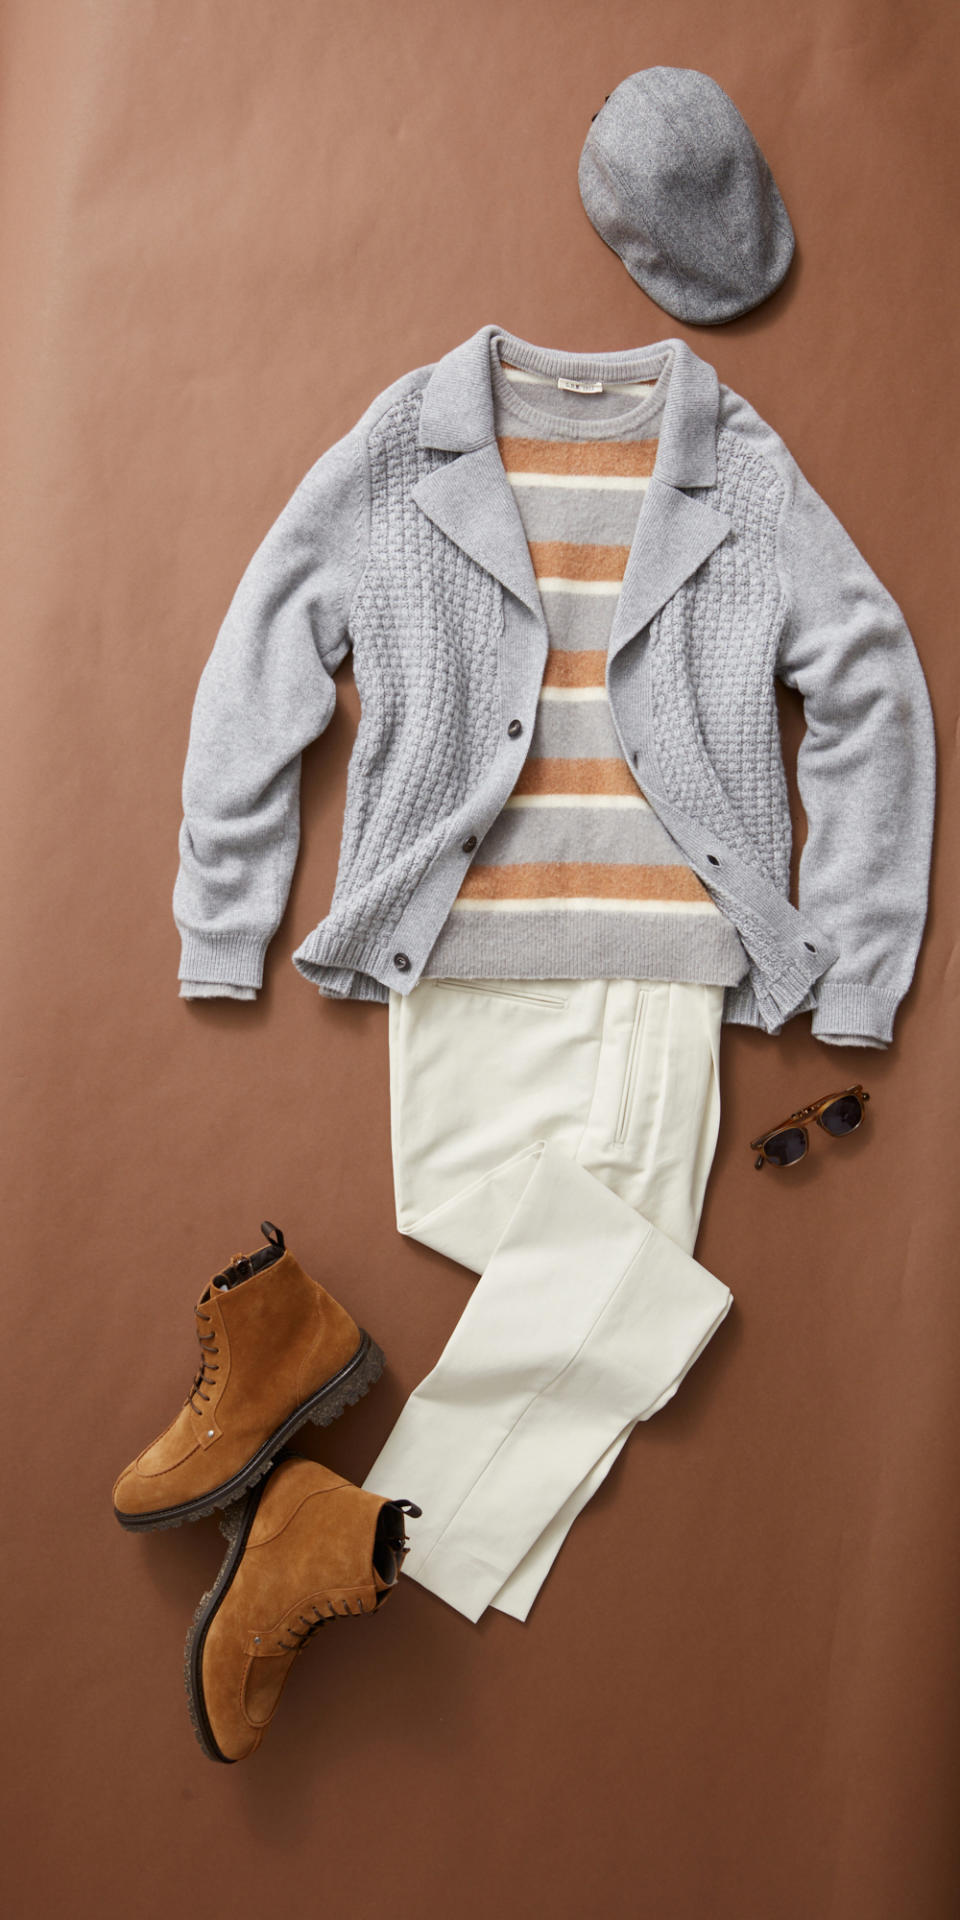 Kiton cashmere knit deconstructed jacket with embossed stitches and horn buttons, $5,360; L.B.M. 1911 wool sweater, $450; Umit Benan B+ two-pleat cotton classic pants, $1,150; Canali suede and leather boots, $795; Garrett Leight acetate sunglasses, $625.